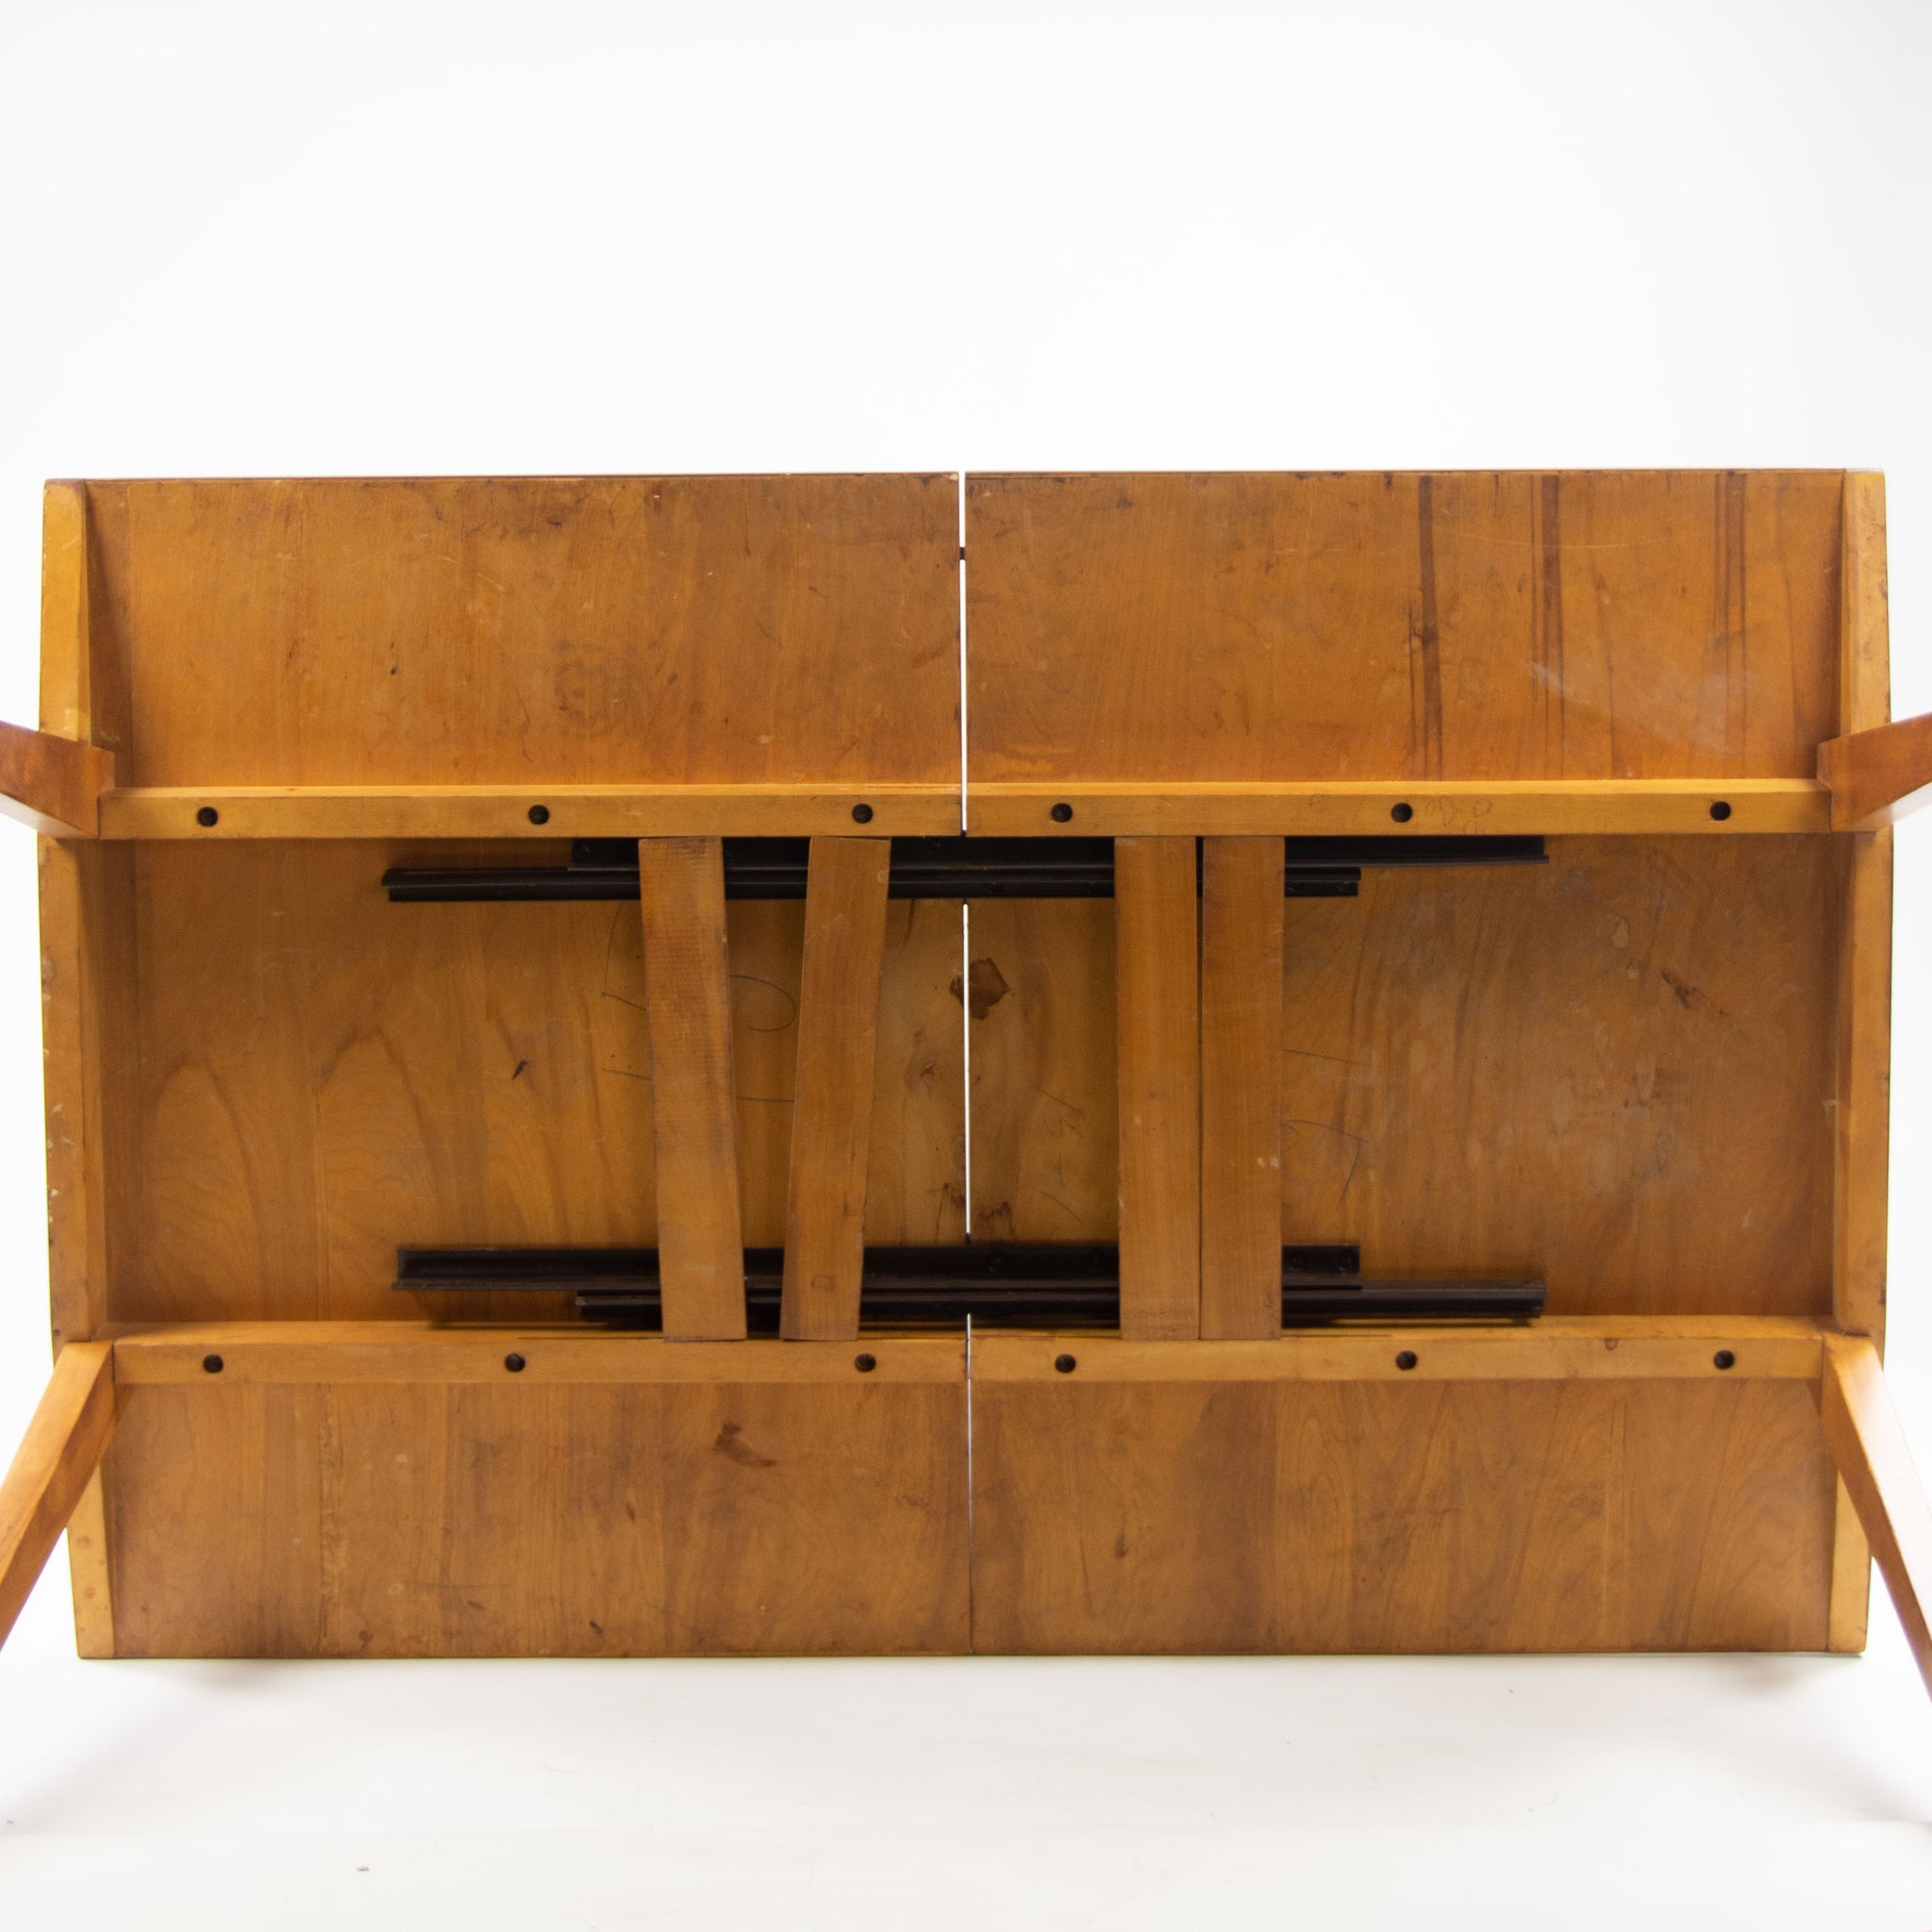 SOLD 1948 RARE George Nakashima for Knoll Associates N-12 Extension Dining Table